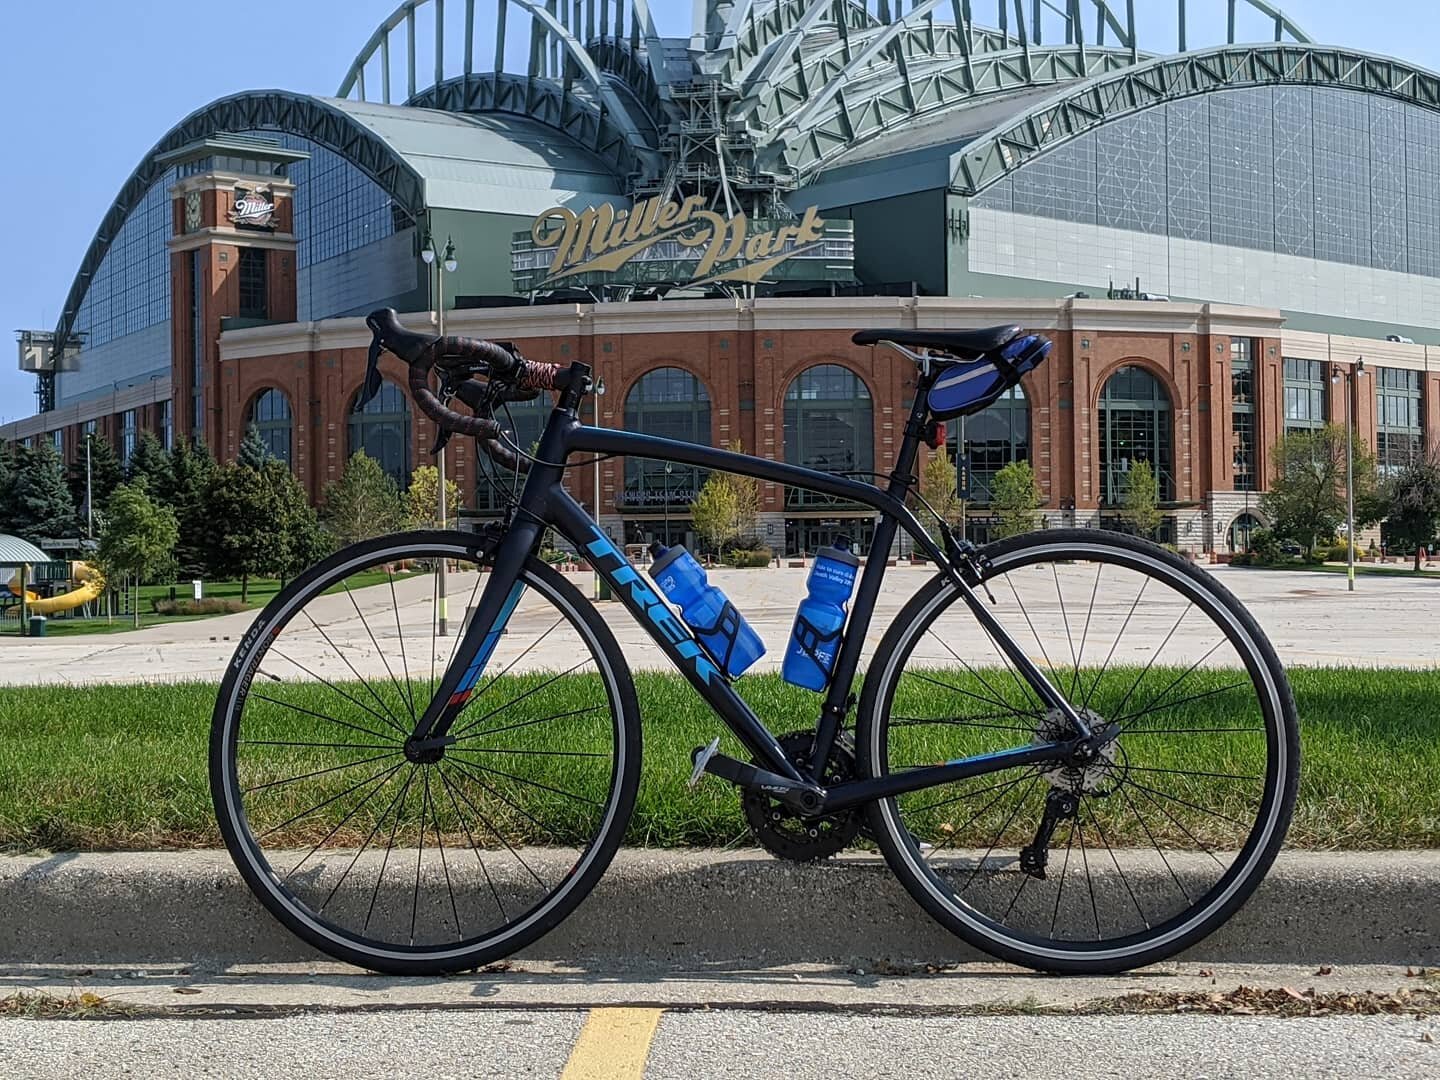 Two long rides this weekend. The summer flew by fast so I'm trying to catch some more rides while the weather cooperates.